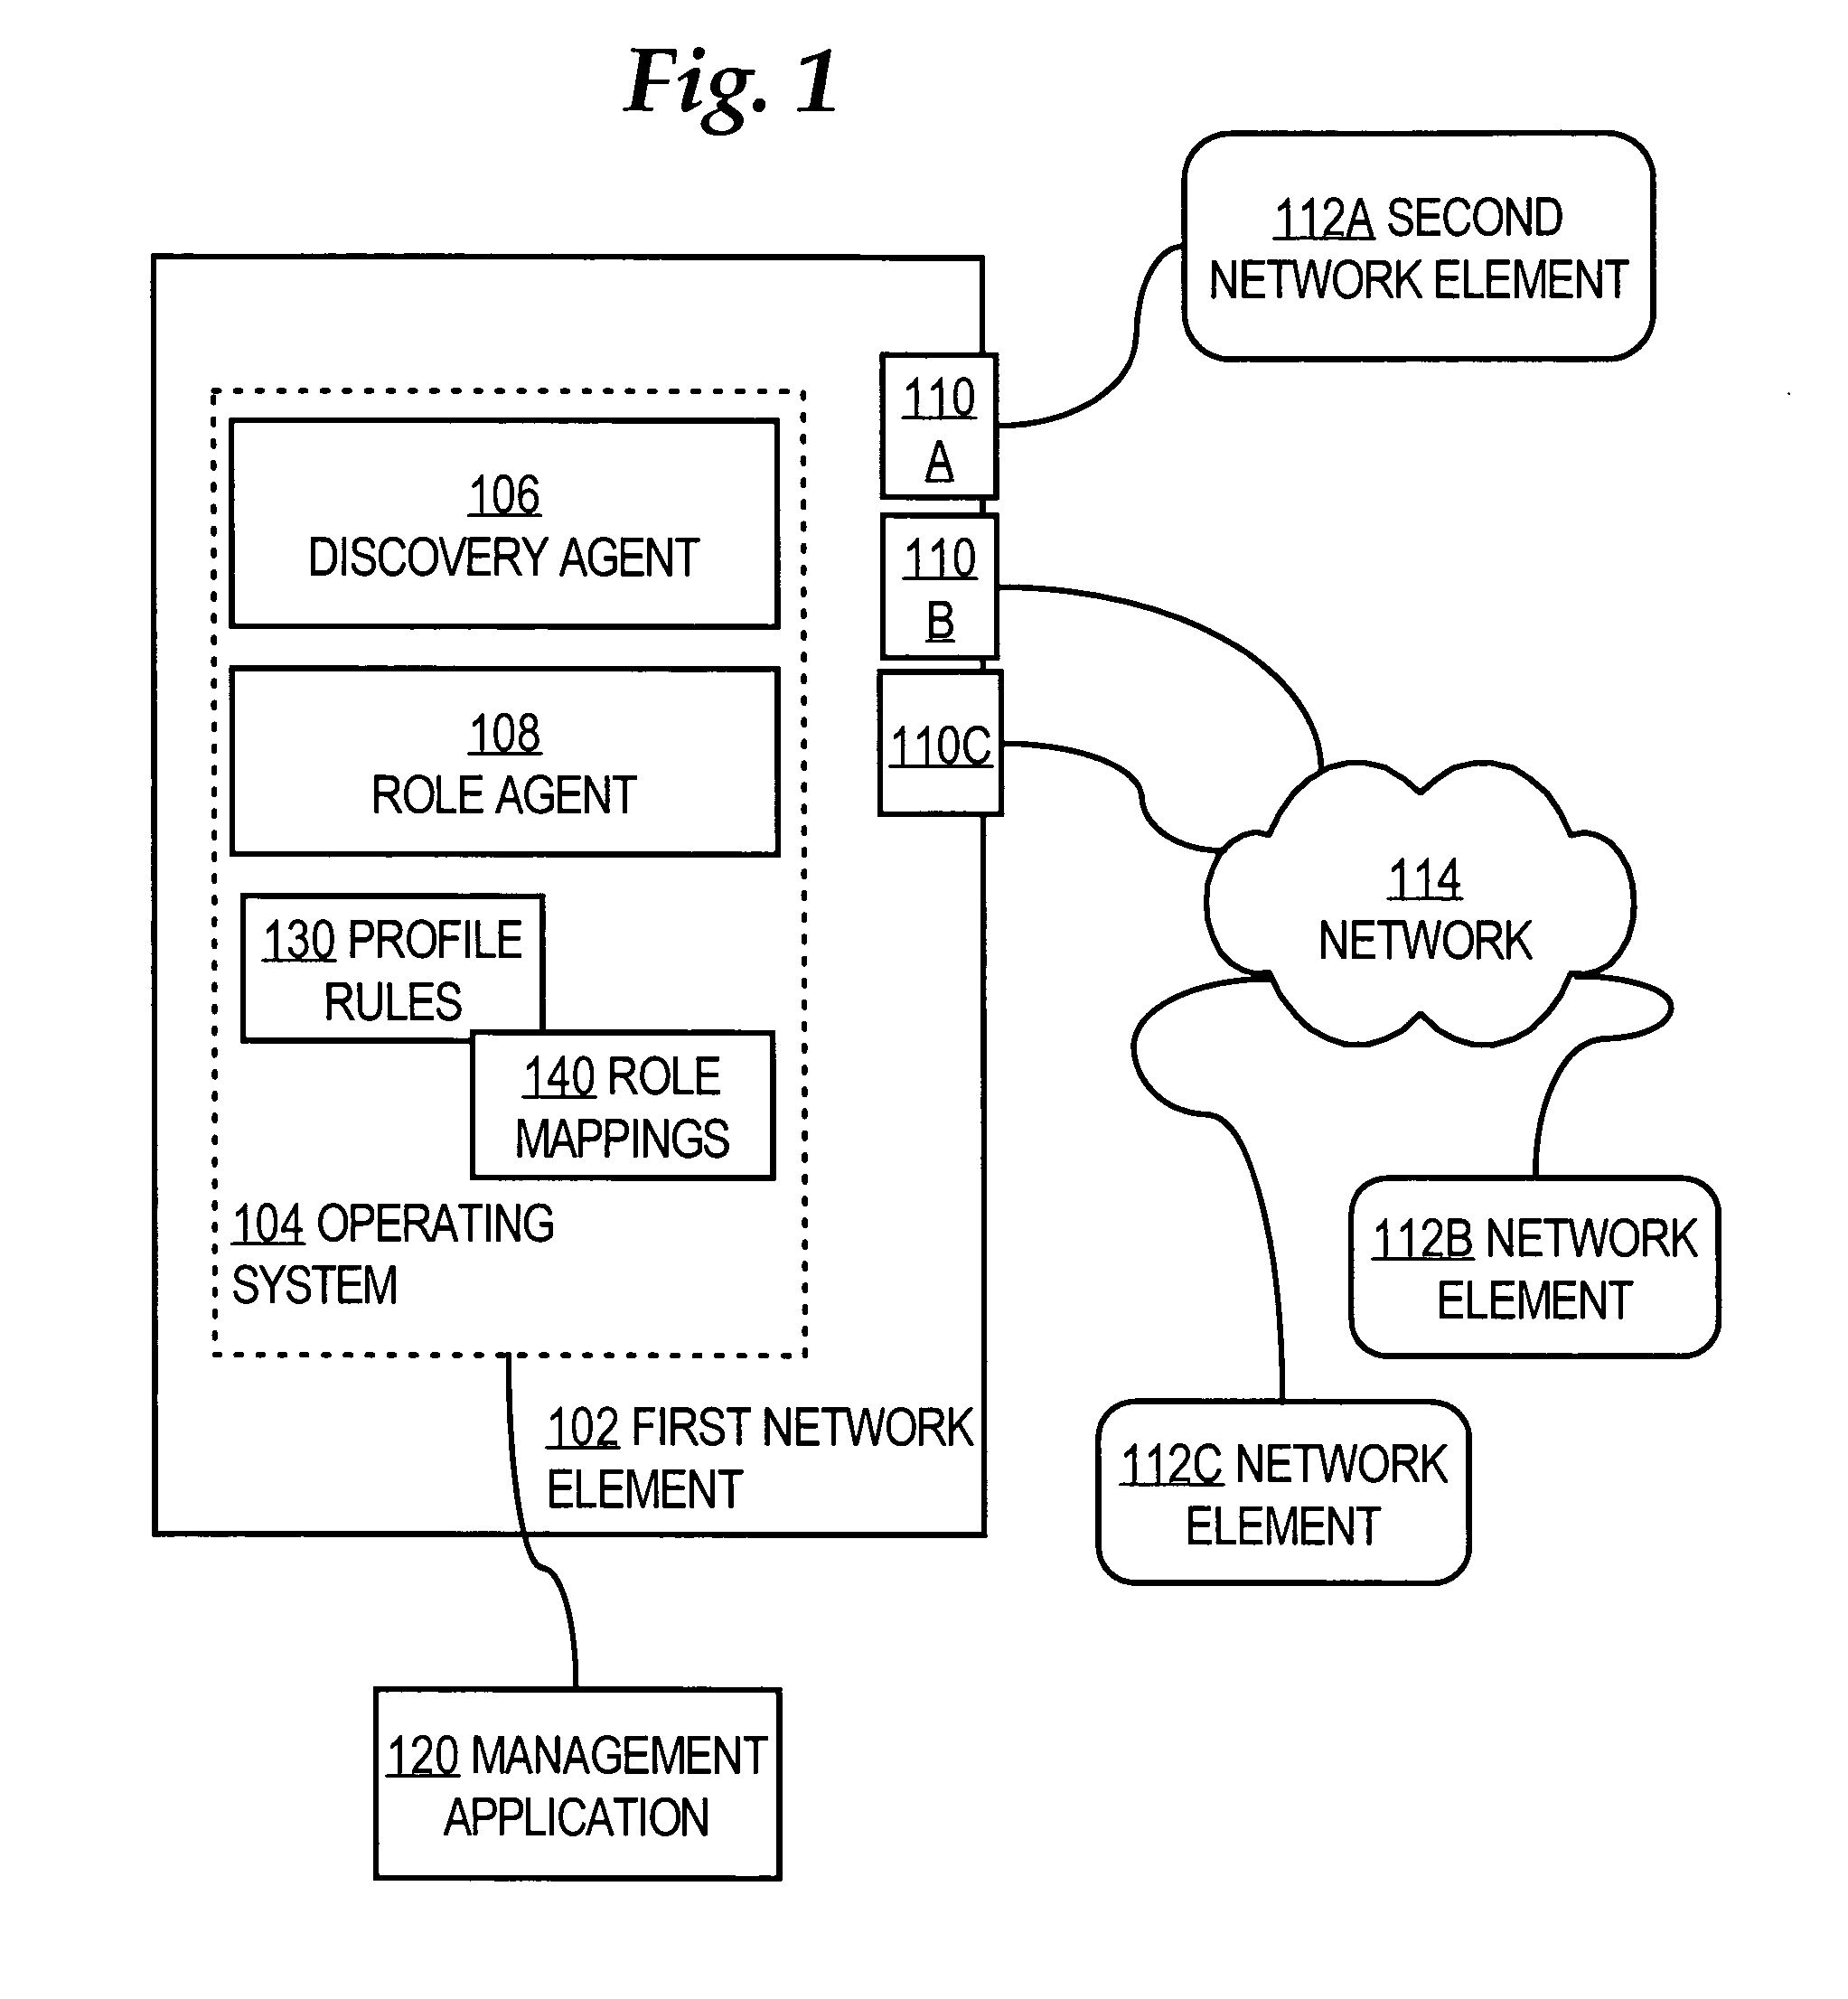 Method and apparatus providing role-based configuration of a port of a network element